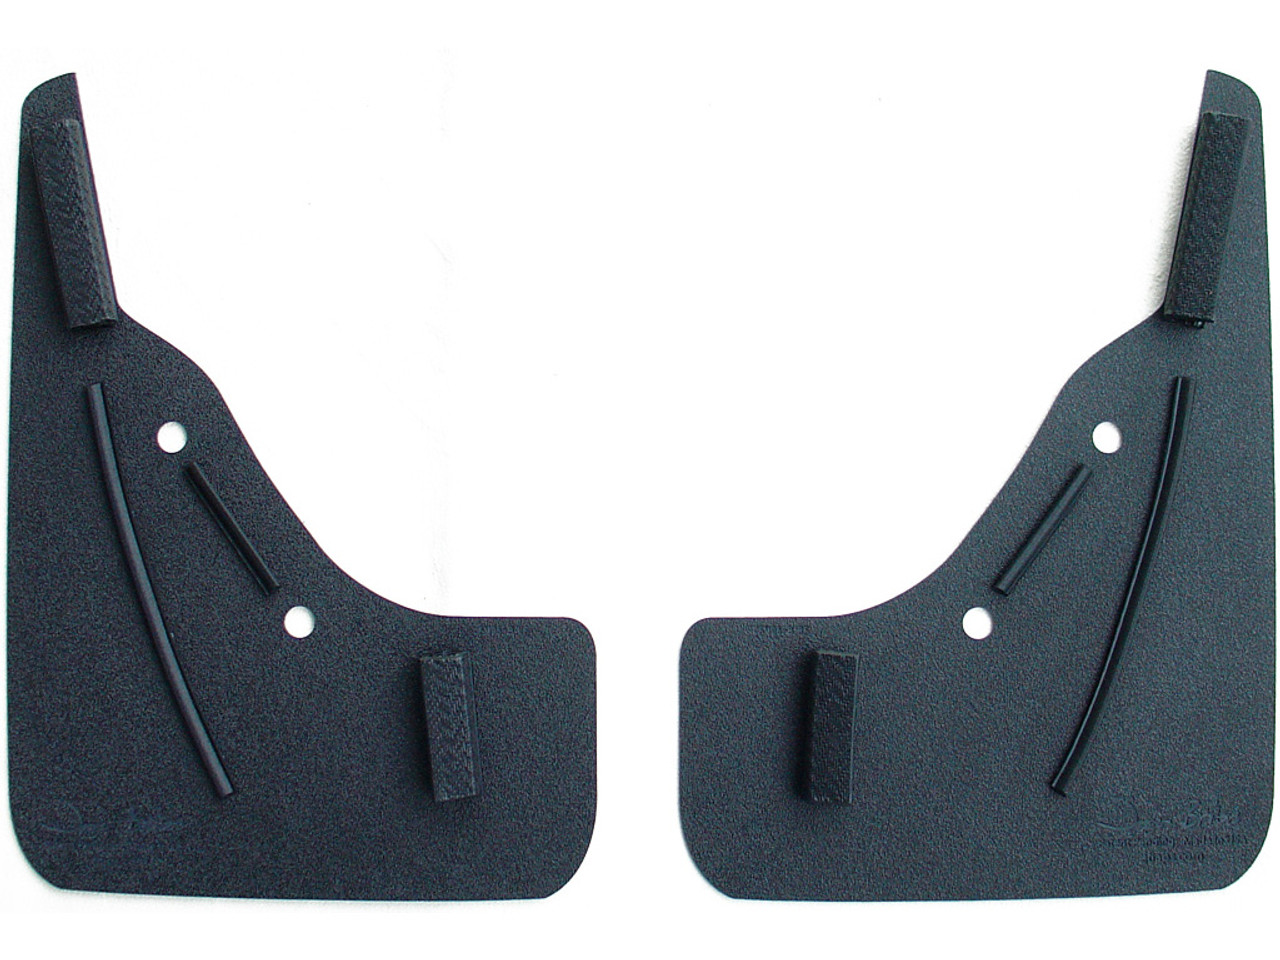 Mustang Front Mud Flaps, Splash Guards for all 2005-2009 Mustang models.